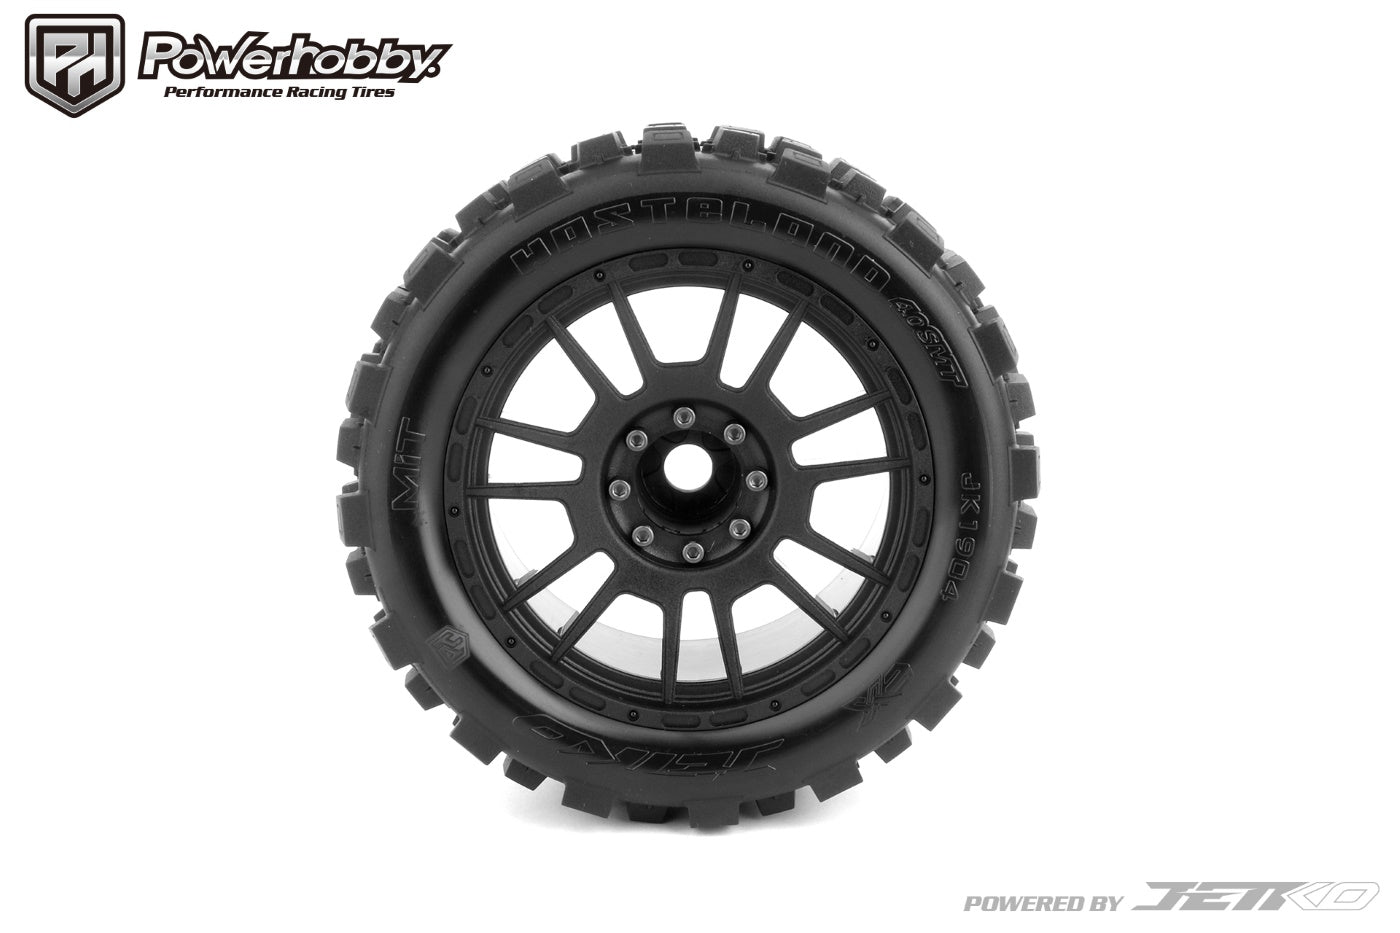 Powerhobby 1/8 SMT 4.0 Wasteland Belted Mounted Tires (2) 17MM - PowerHobby